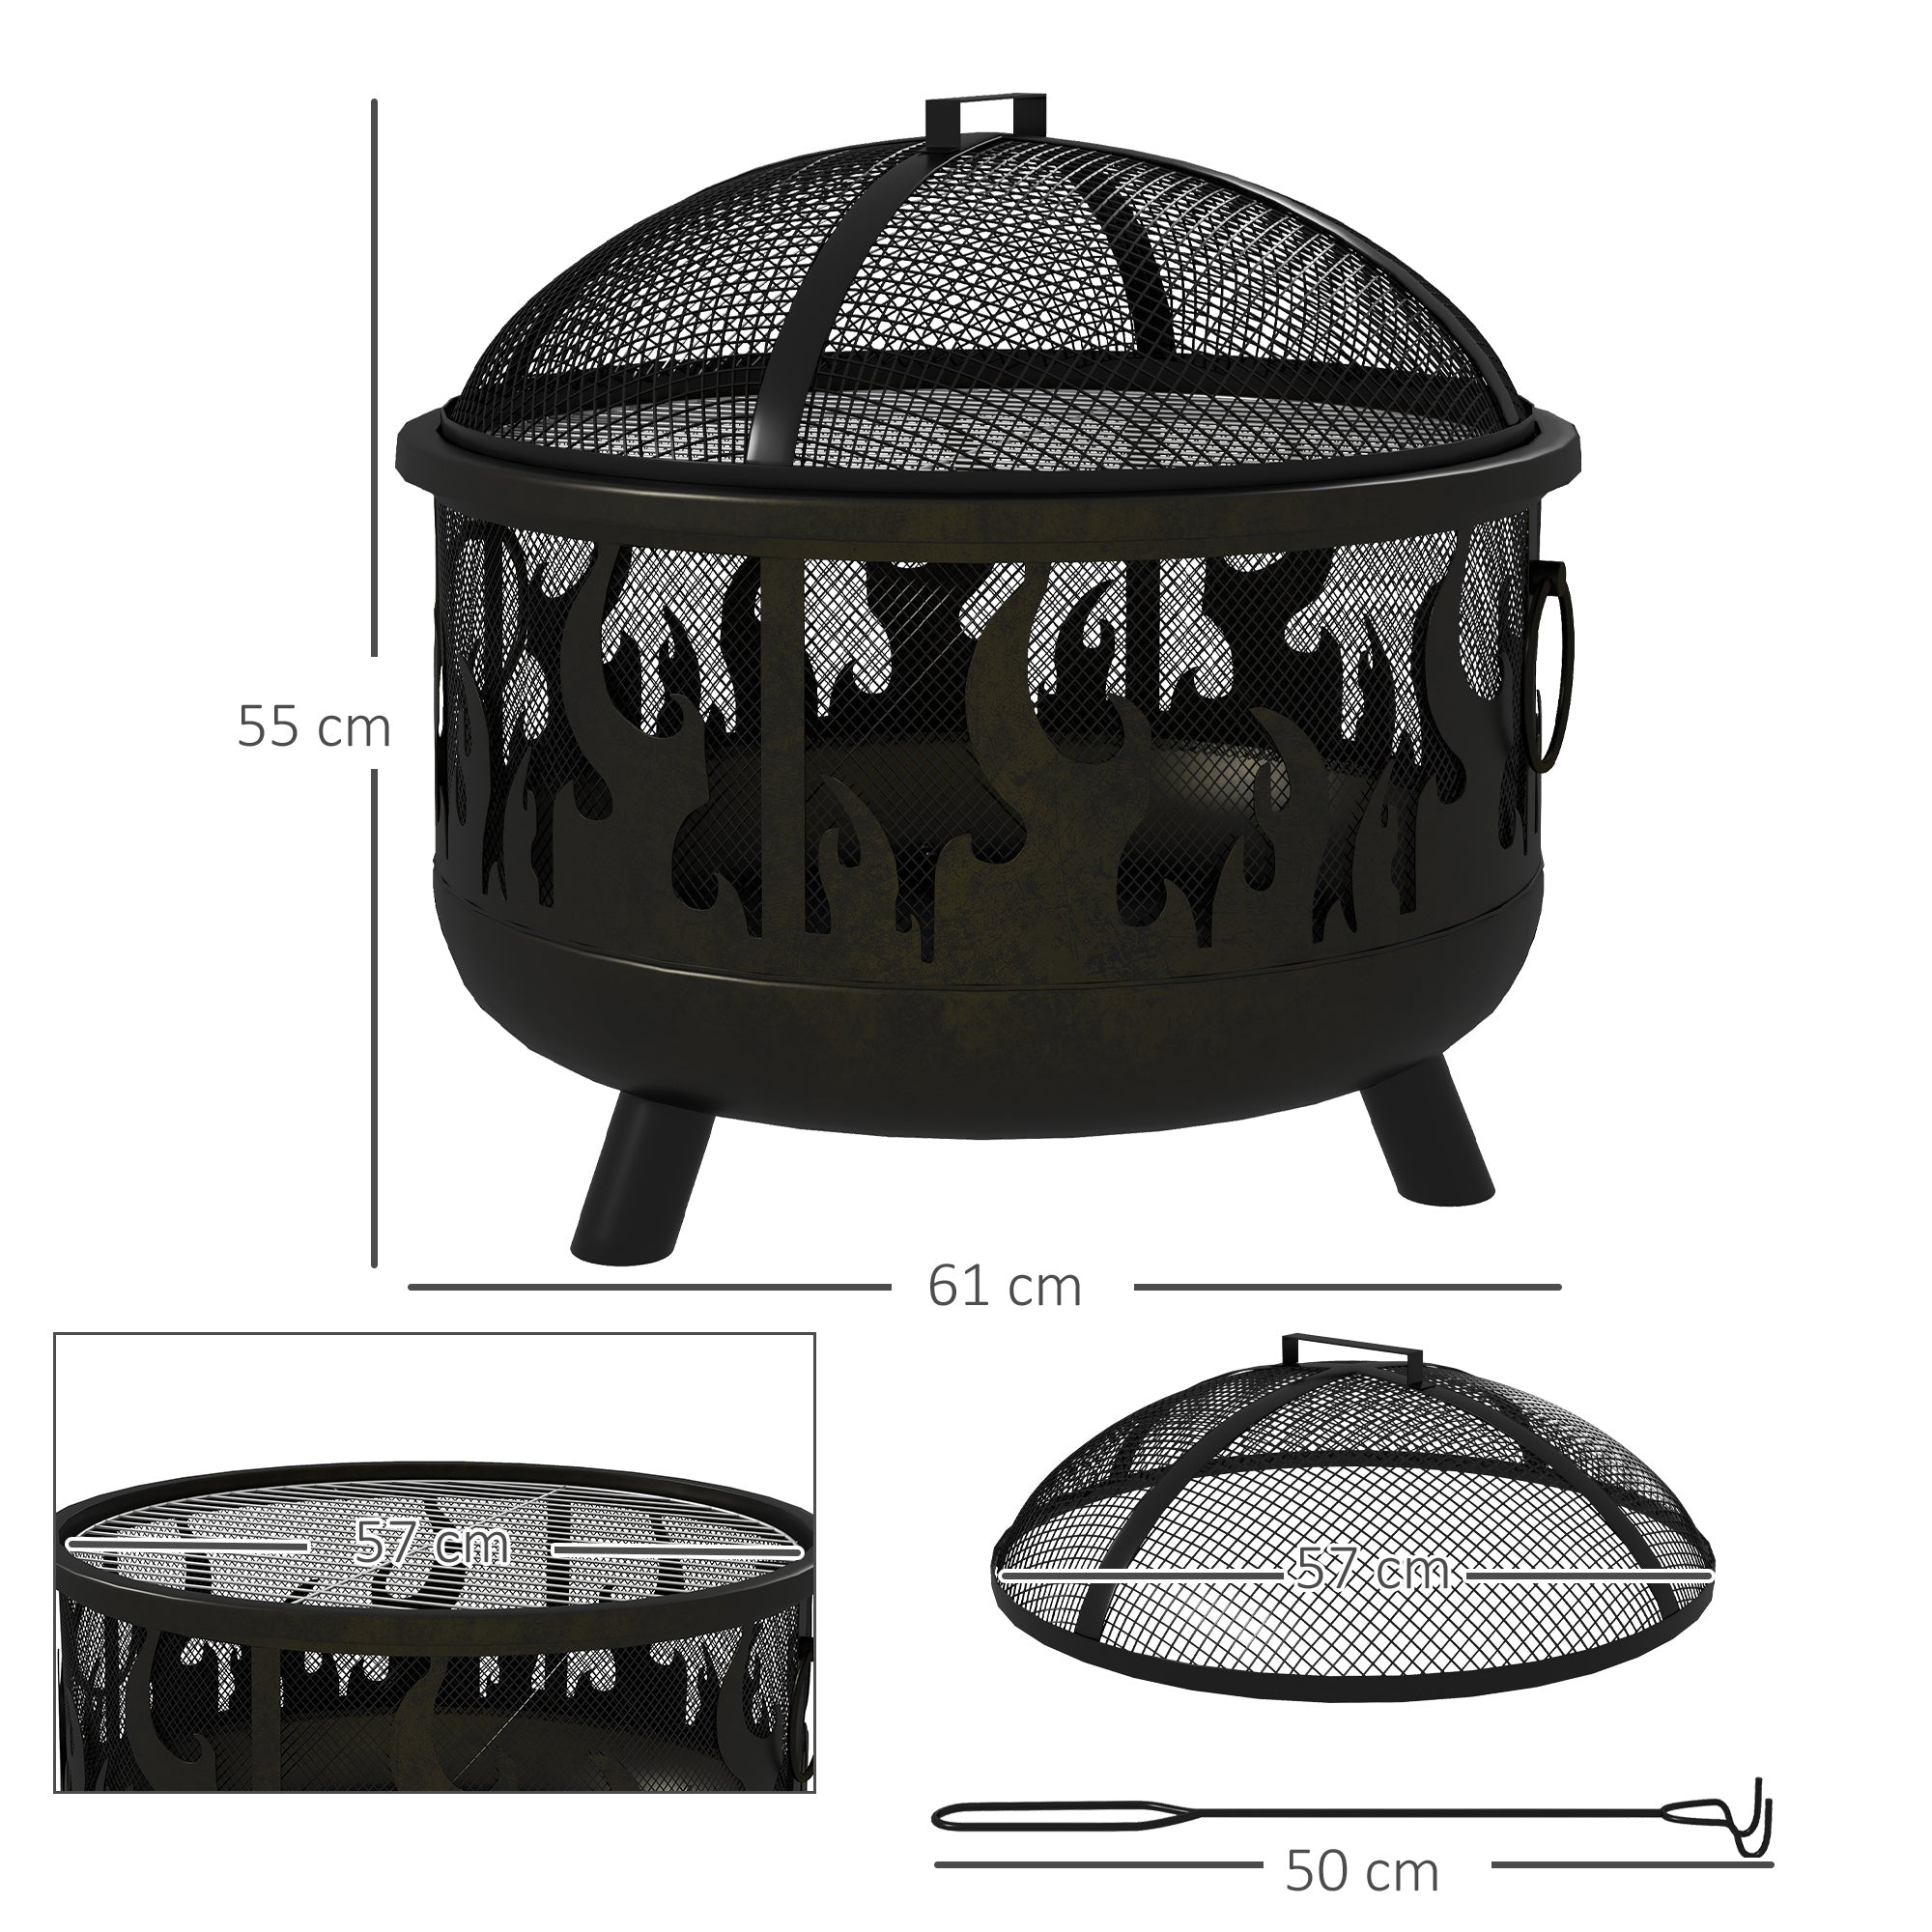 Outsunny Metal Firepit Bowl Outdoor 2-In-1 Round Fire Pit w/ Lid, Grill, Poker, Handles for Garden, Camping, BBQ, Bonfire, Wood Burning Stove, 61.5 x 61.5 x 52cm, Black